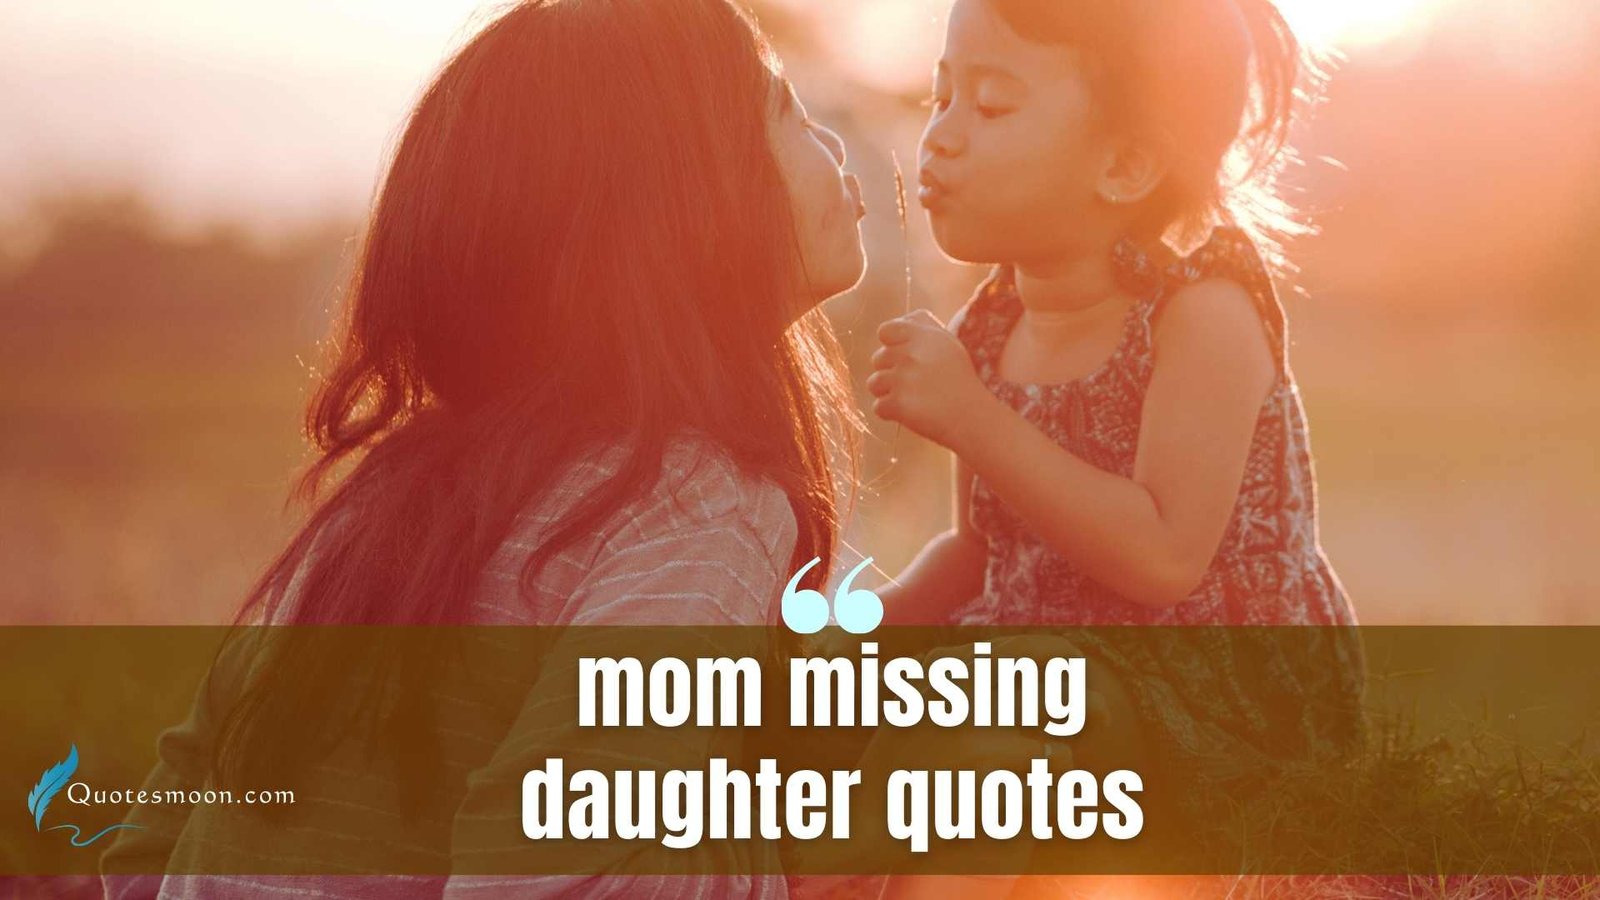 mom missing daughter quotes images